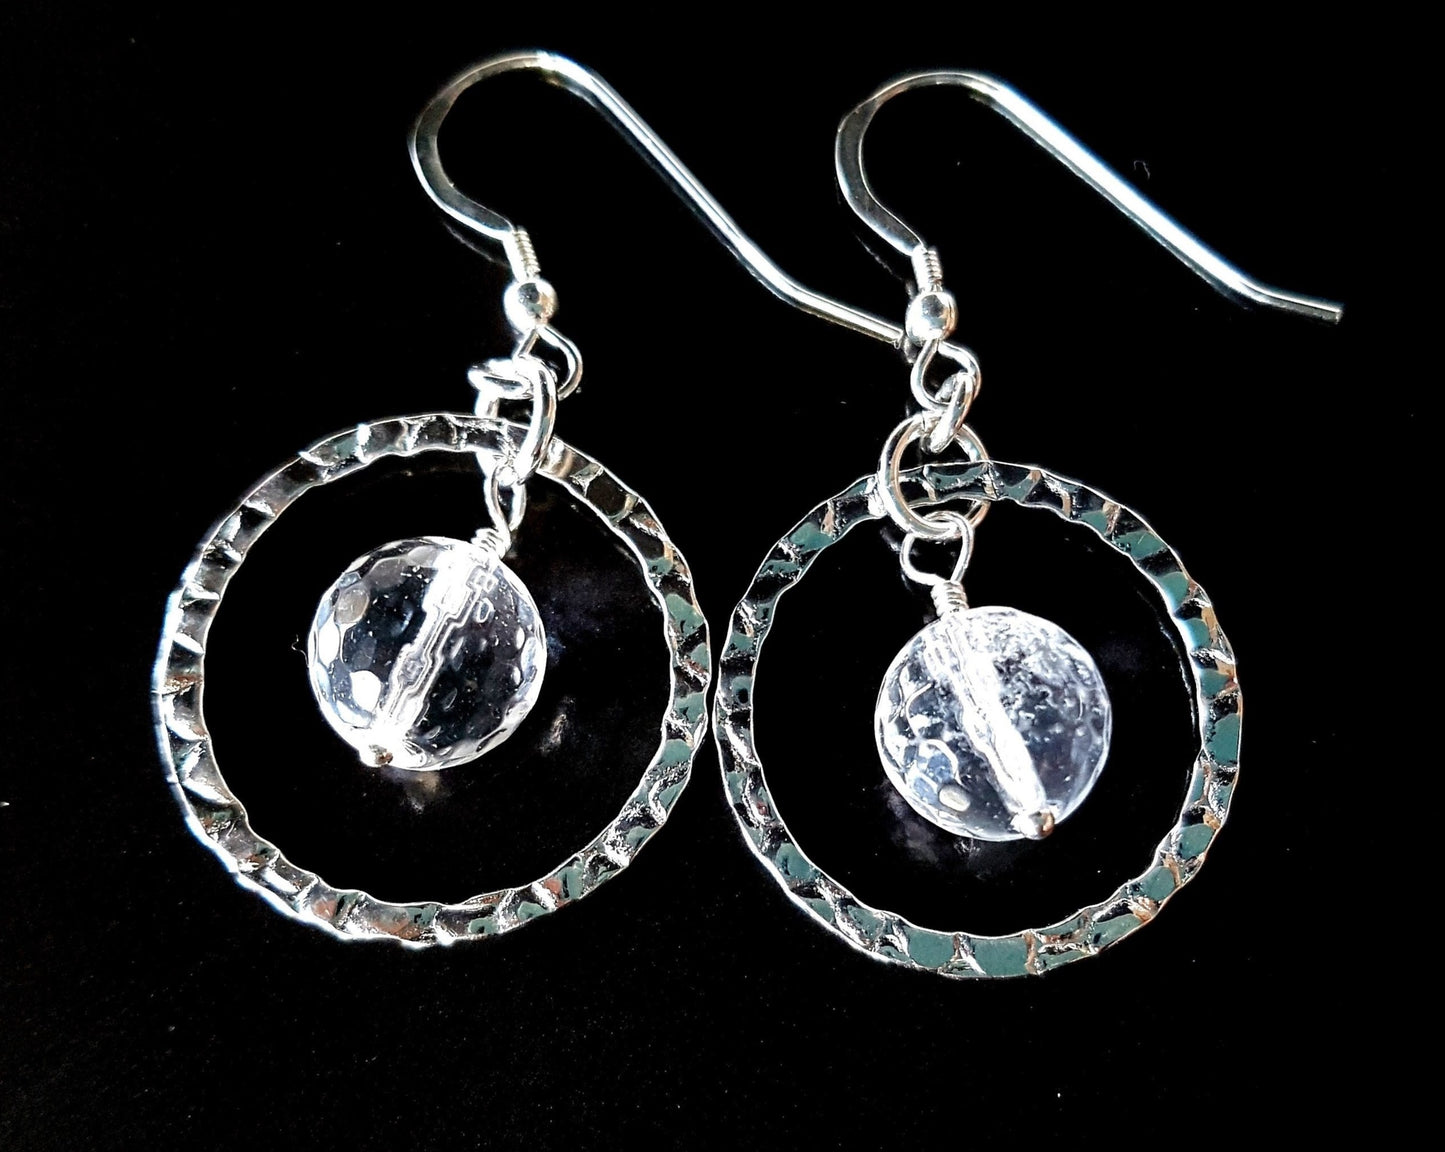 Rock Crystal Infinity Earrings, Handmade with Sterling Silver and Natural Clear Quartz Crystal. 